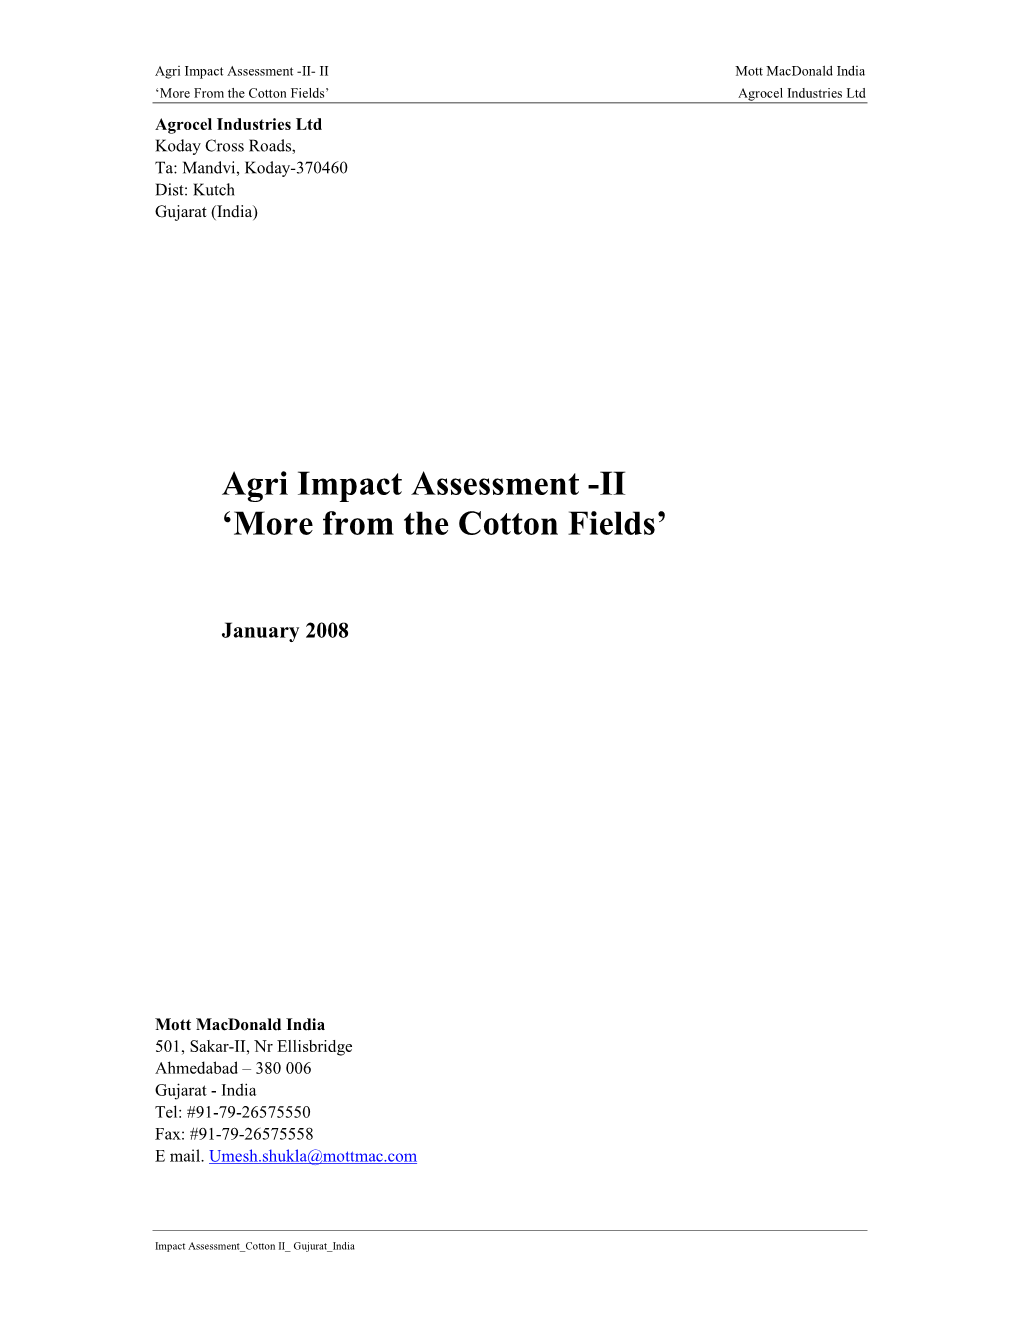 Agri Impact Assessment -II 'More from the Cotton Fields'